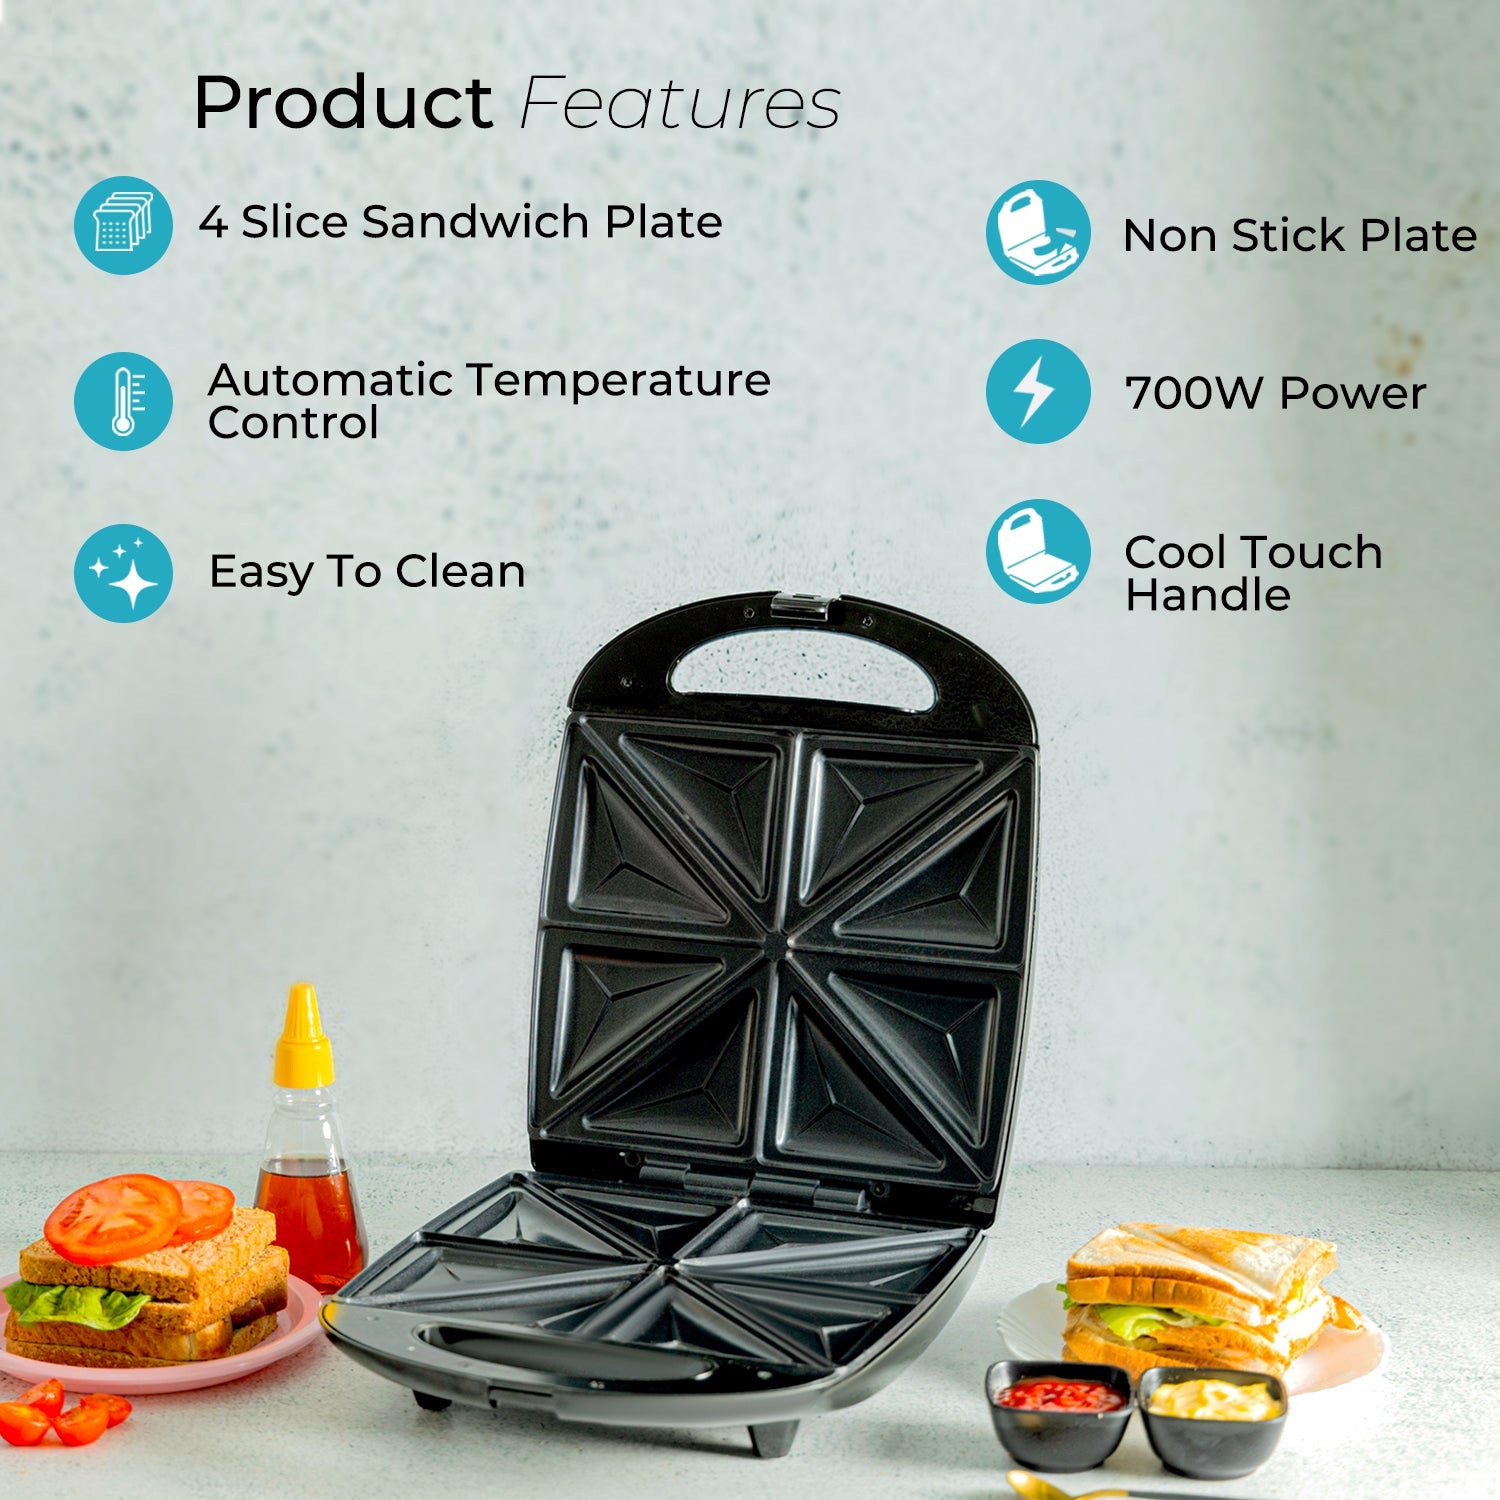 Deep Fill Toastie Maker - 4 Slice Sandwich Toaster, 1100W Sandwich Makers Geepas | For you. For life. 